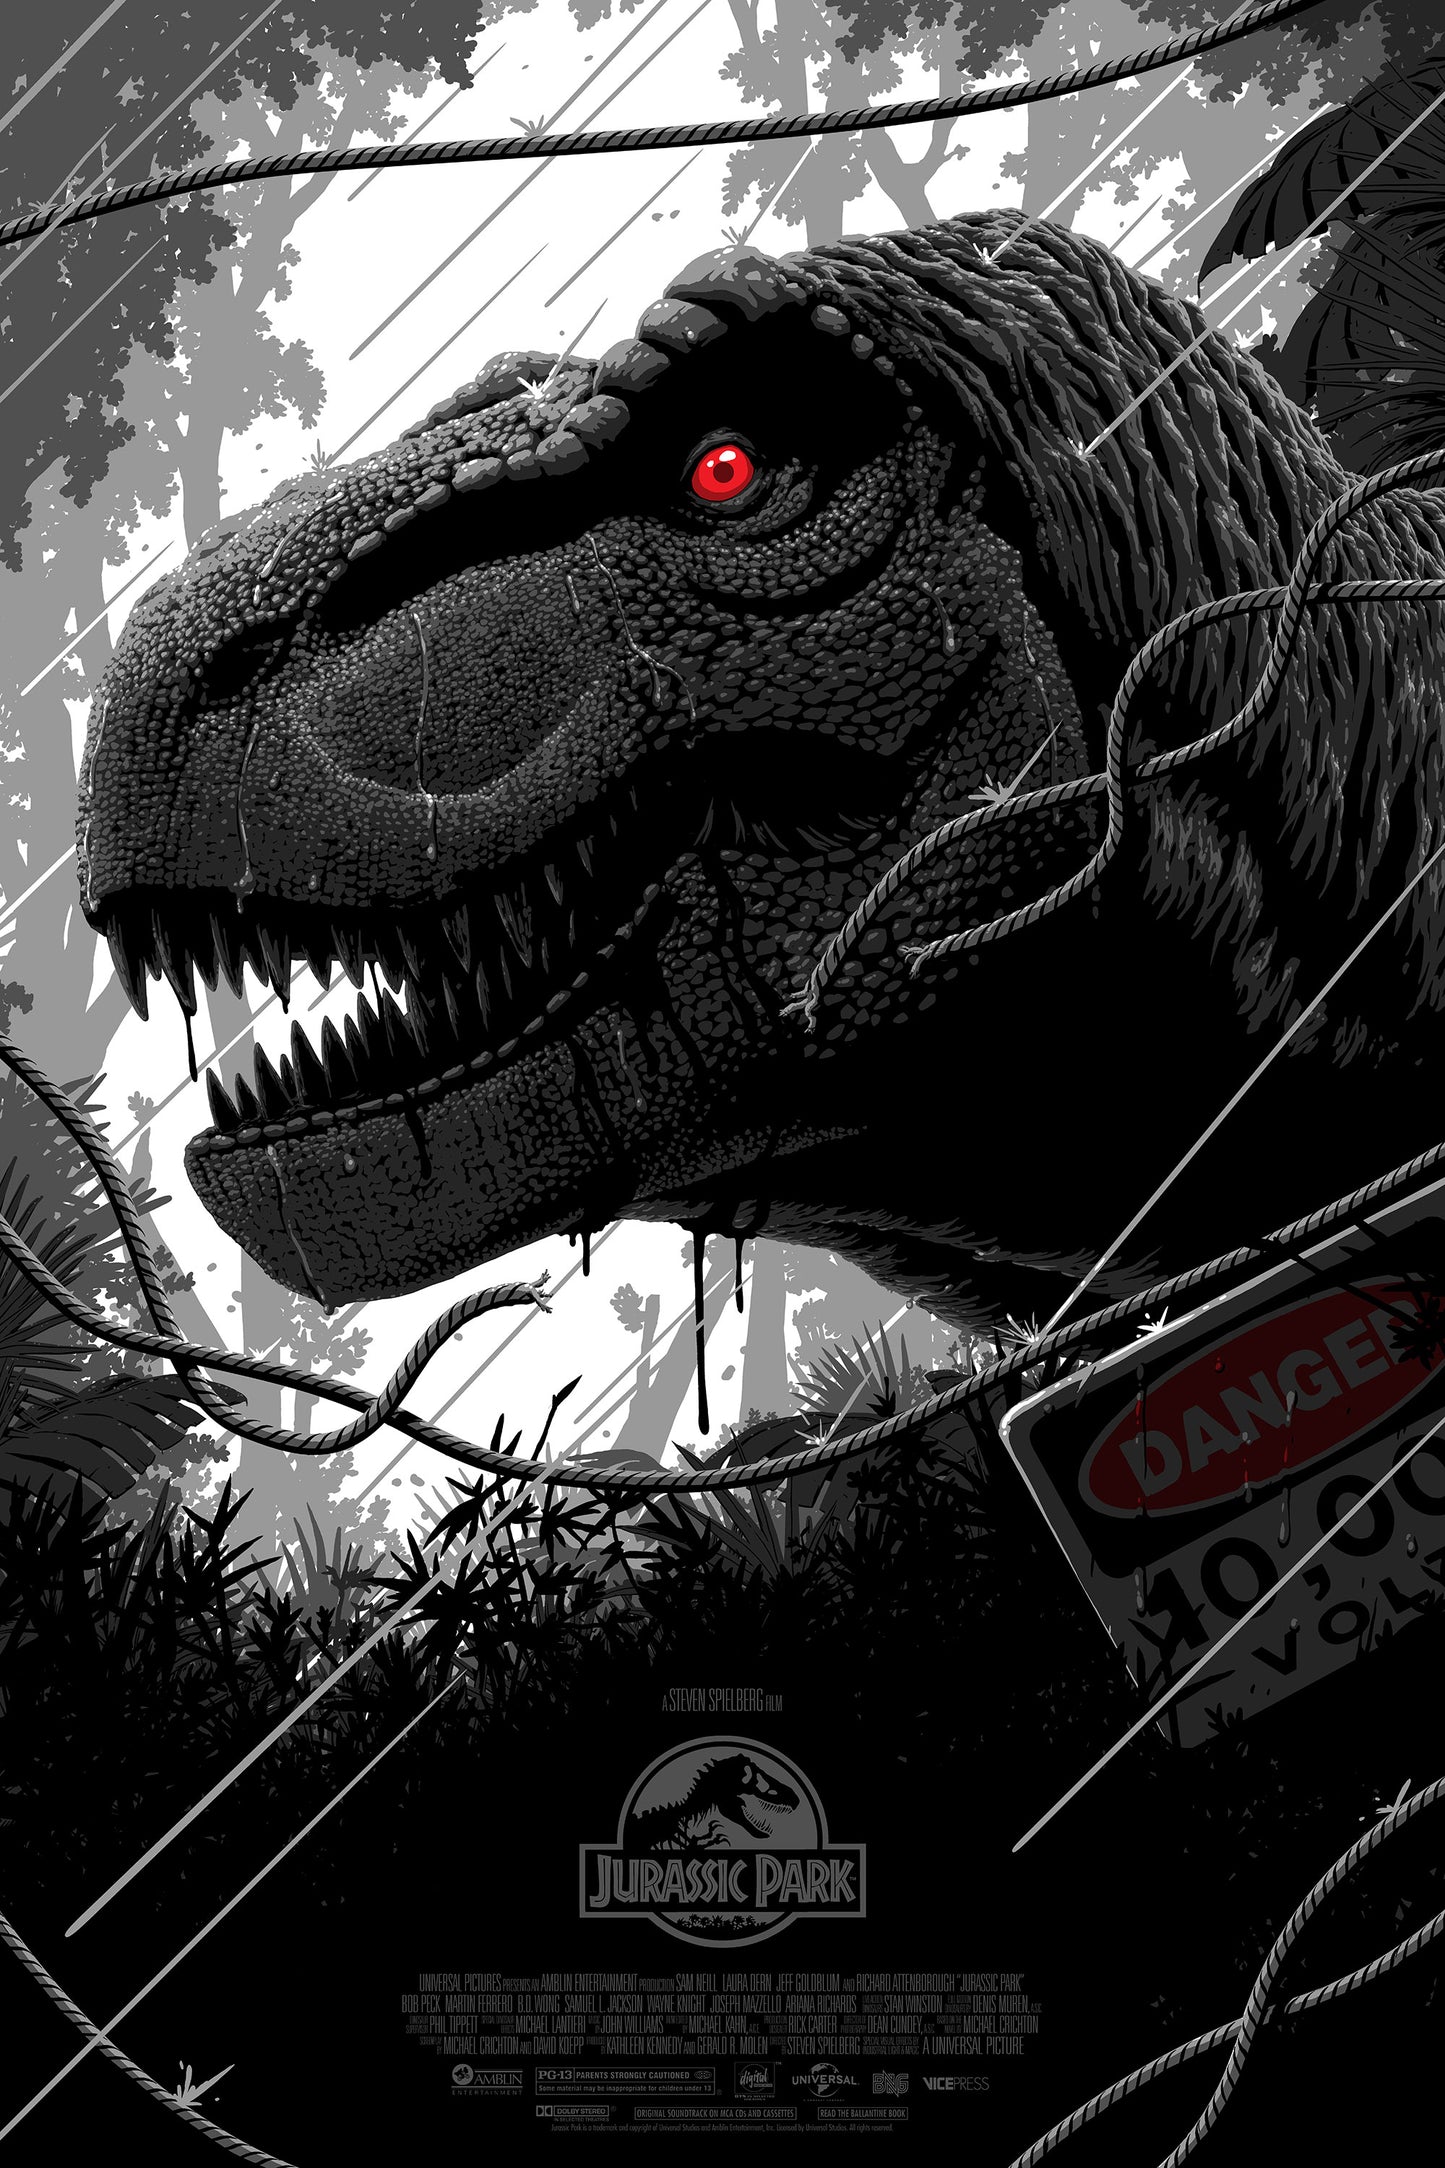 Florey "T-Rex doesn't want to be fed, he wants to hunt (Jurassic Park)" Variant